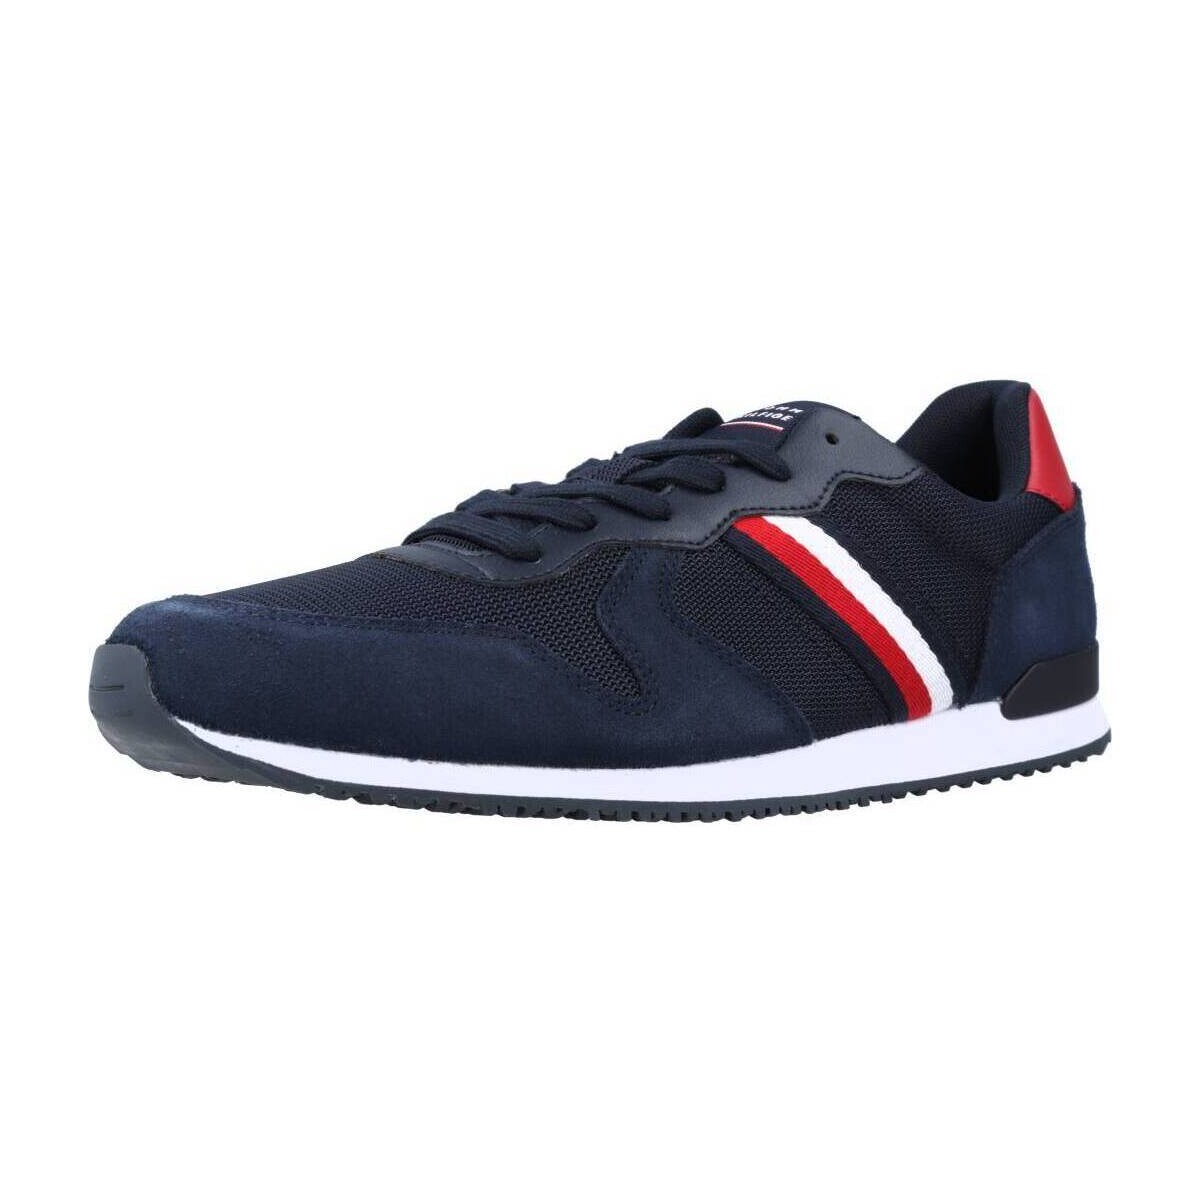 Sneakers Tommy Hilfiger ICONIC MIX RUNNER Μπλέ